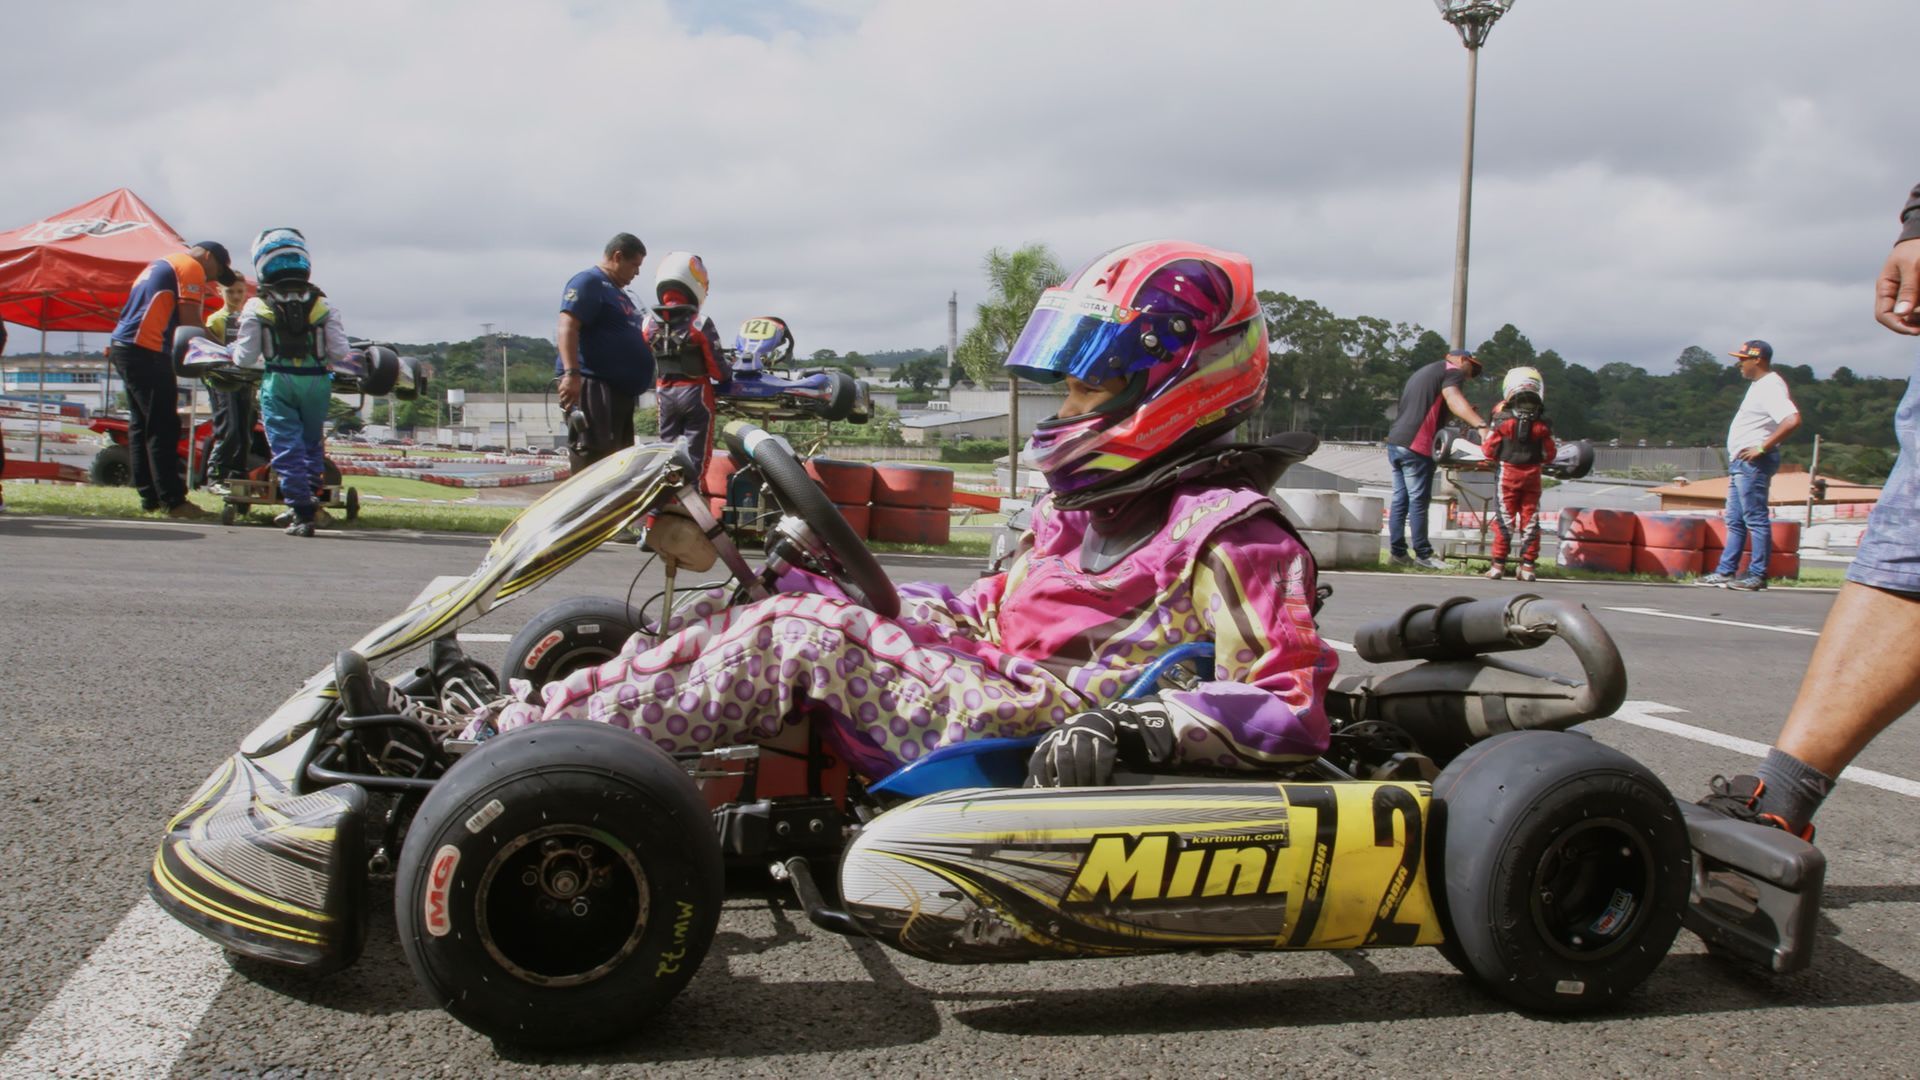 A person is sitting in a go kart on a track.